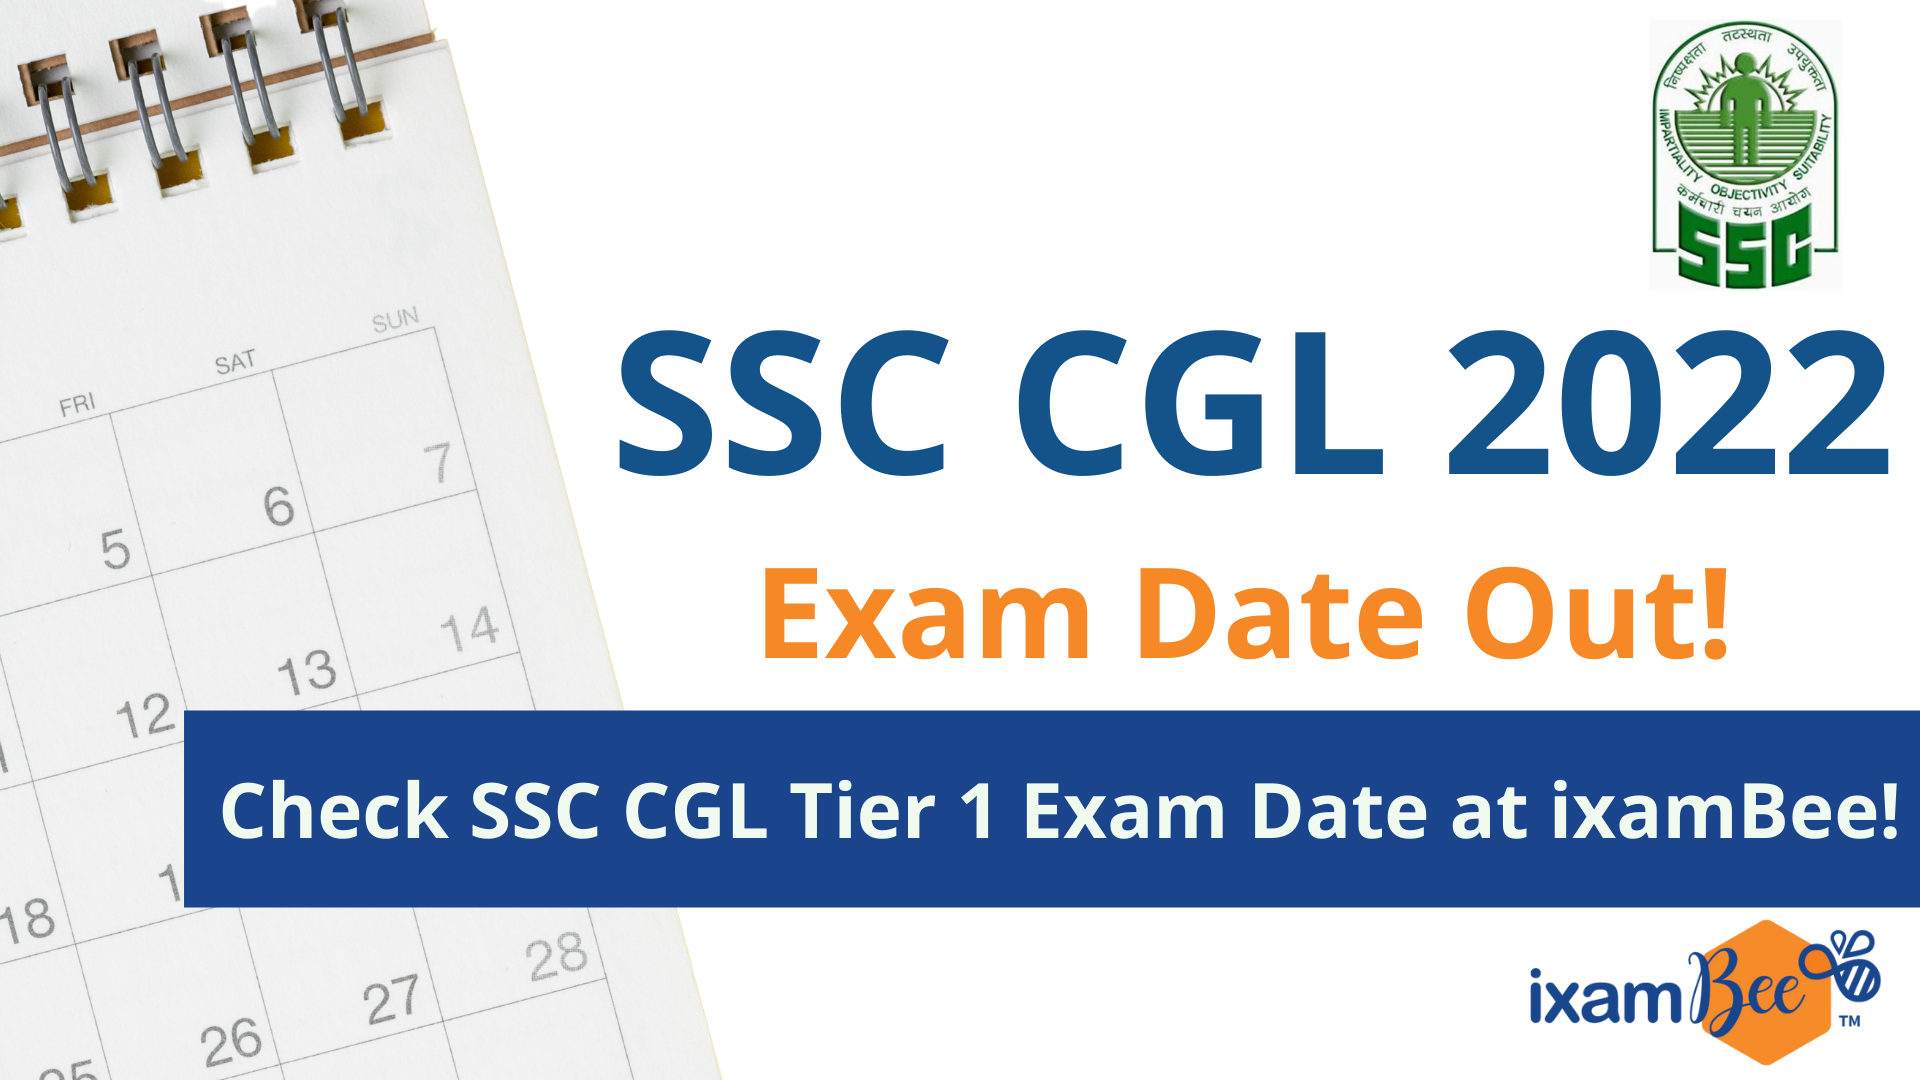 SSC CGL 2022 Exam Date Out!